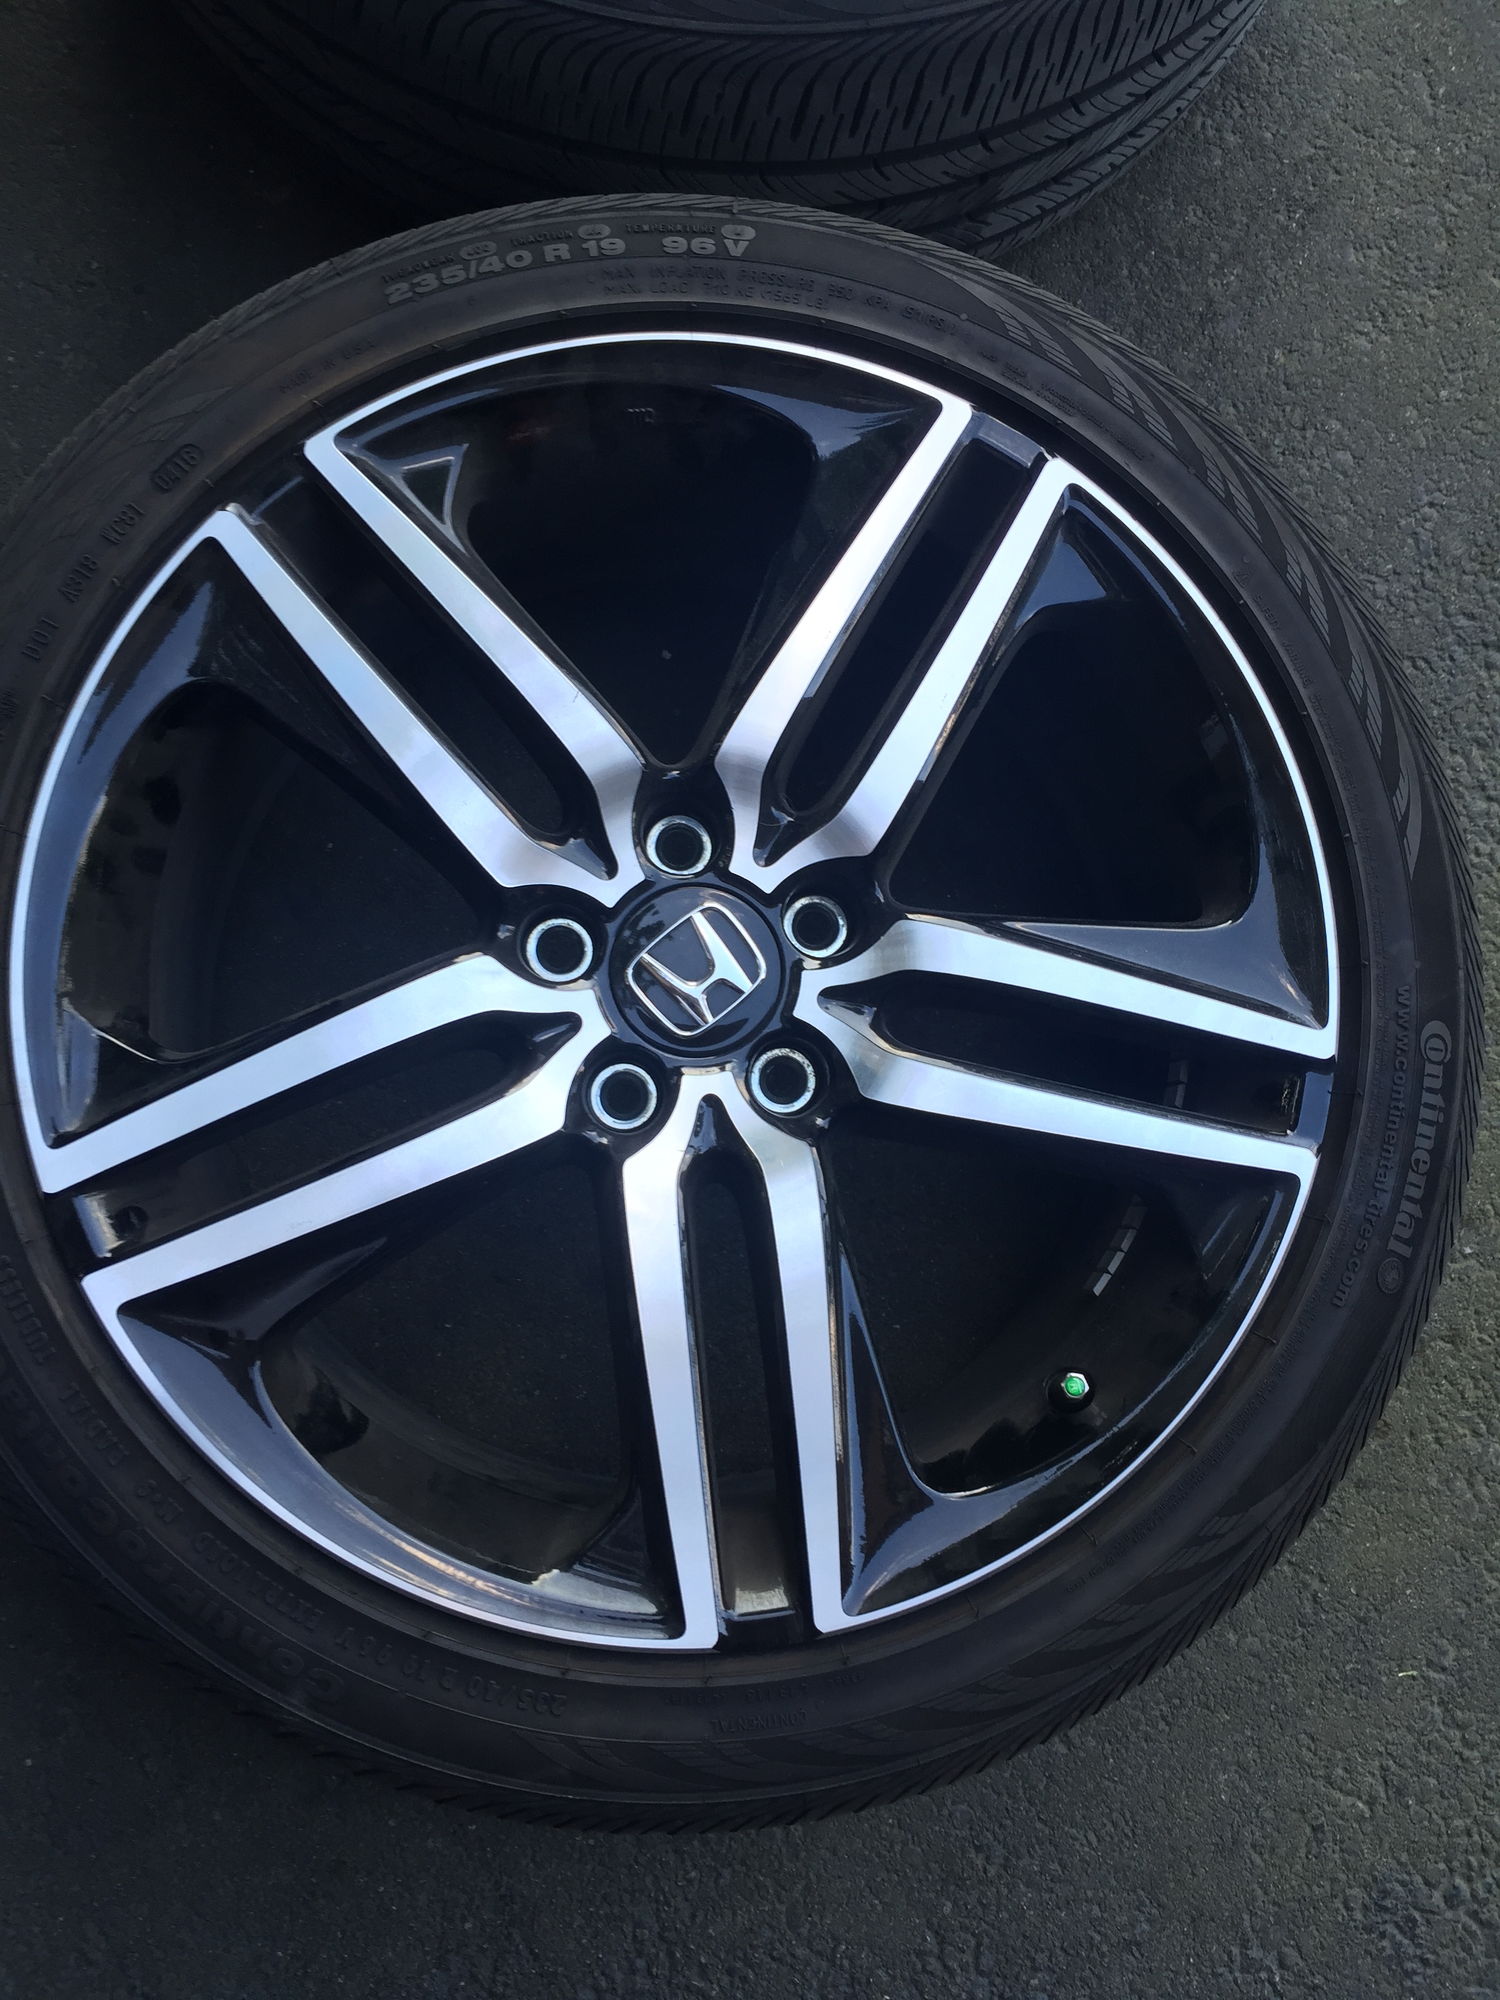 SOLD 20162017 Honda Accord 19 inch Sport/Touring Rims/Tires Like NEW